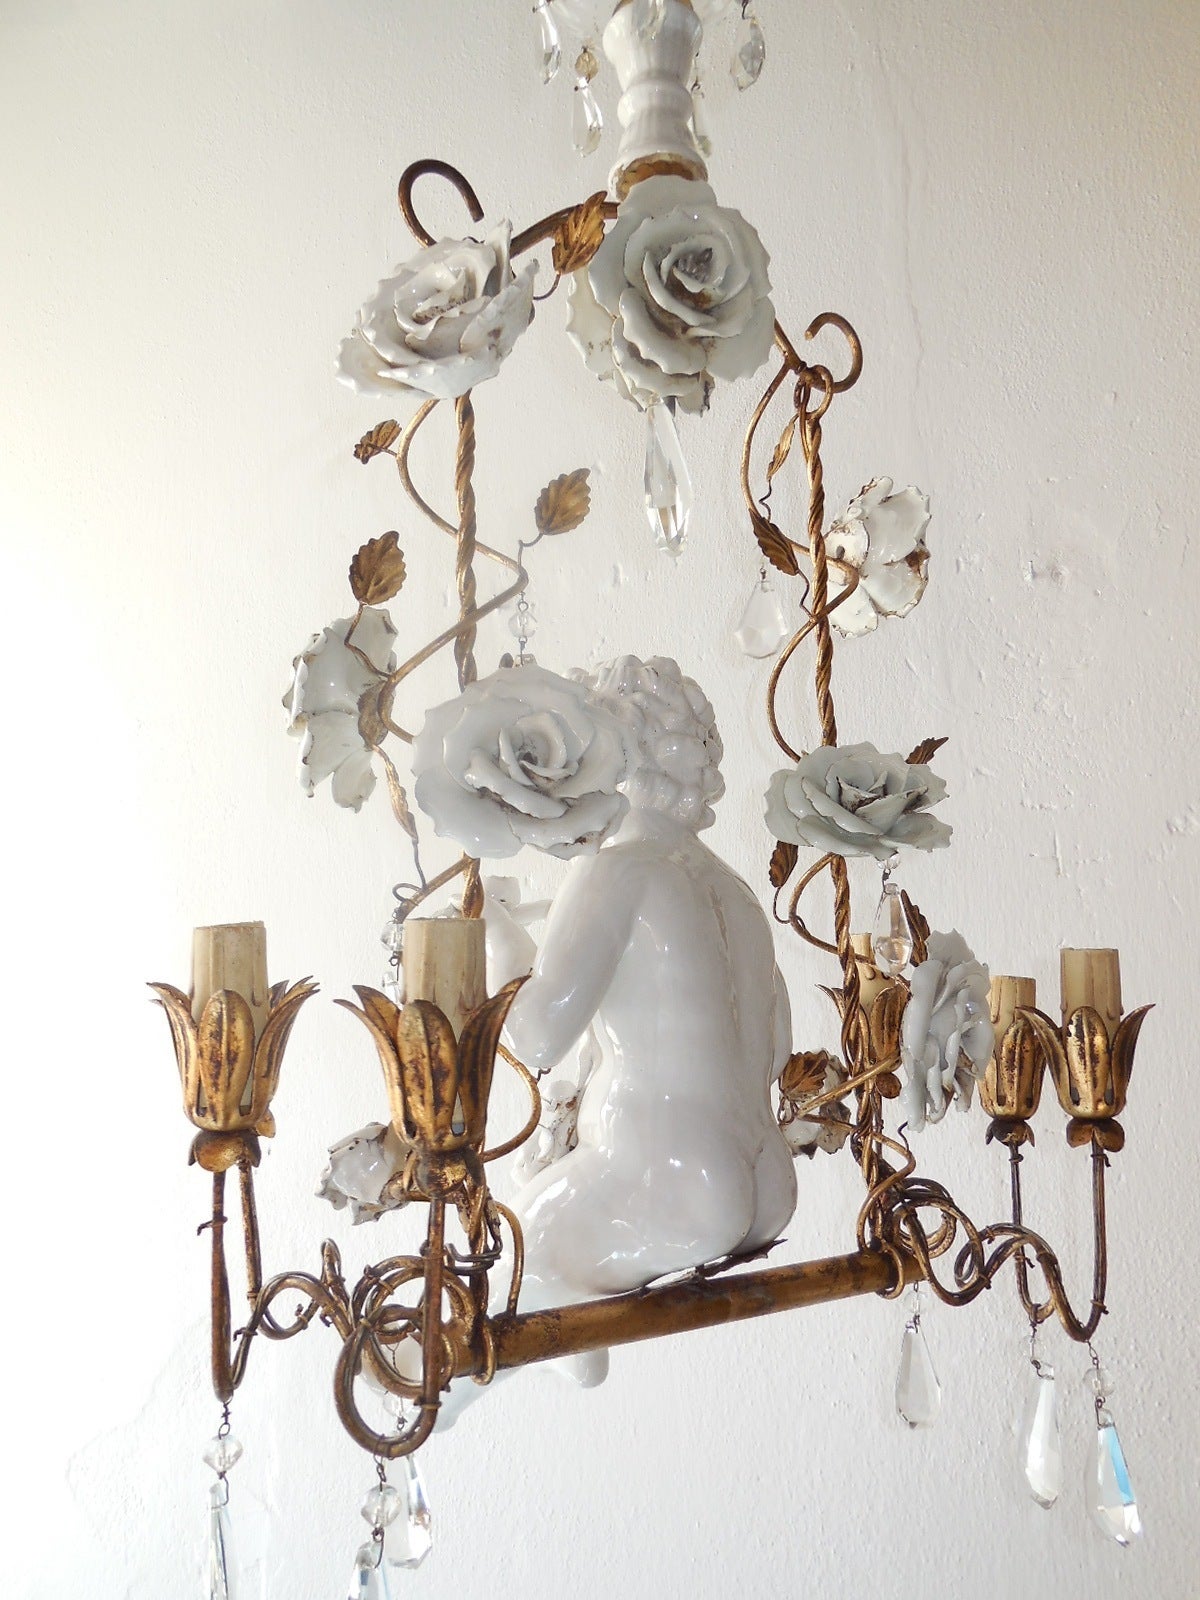 Mid-20th Century French Porcelain Roses and Tole with Huge Cherub Swinging Chandelier